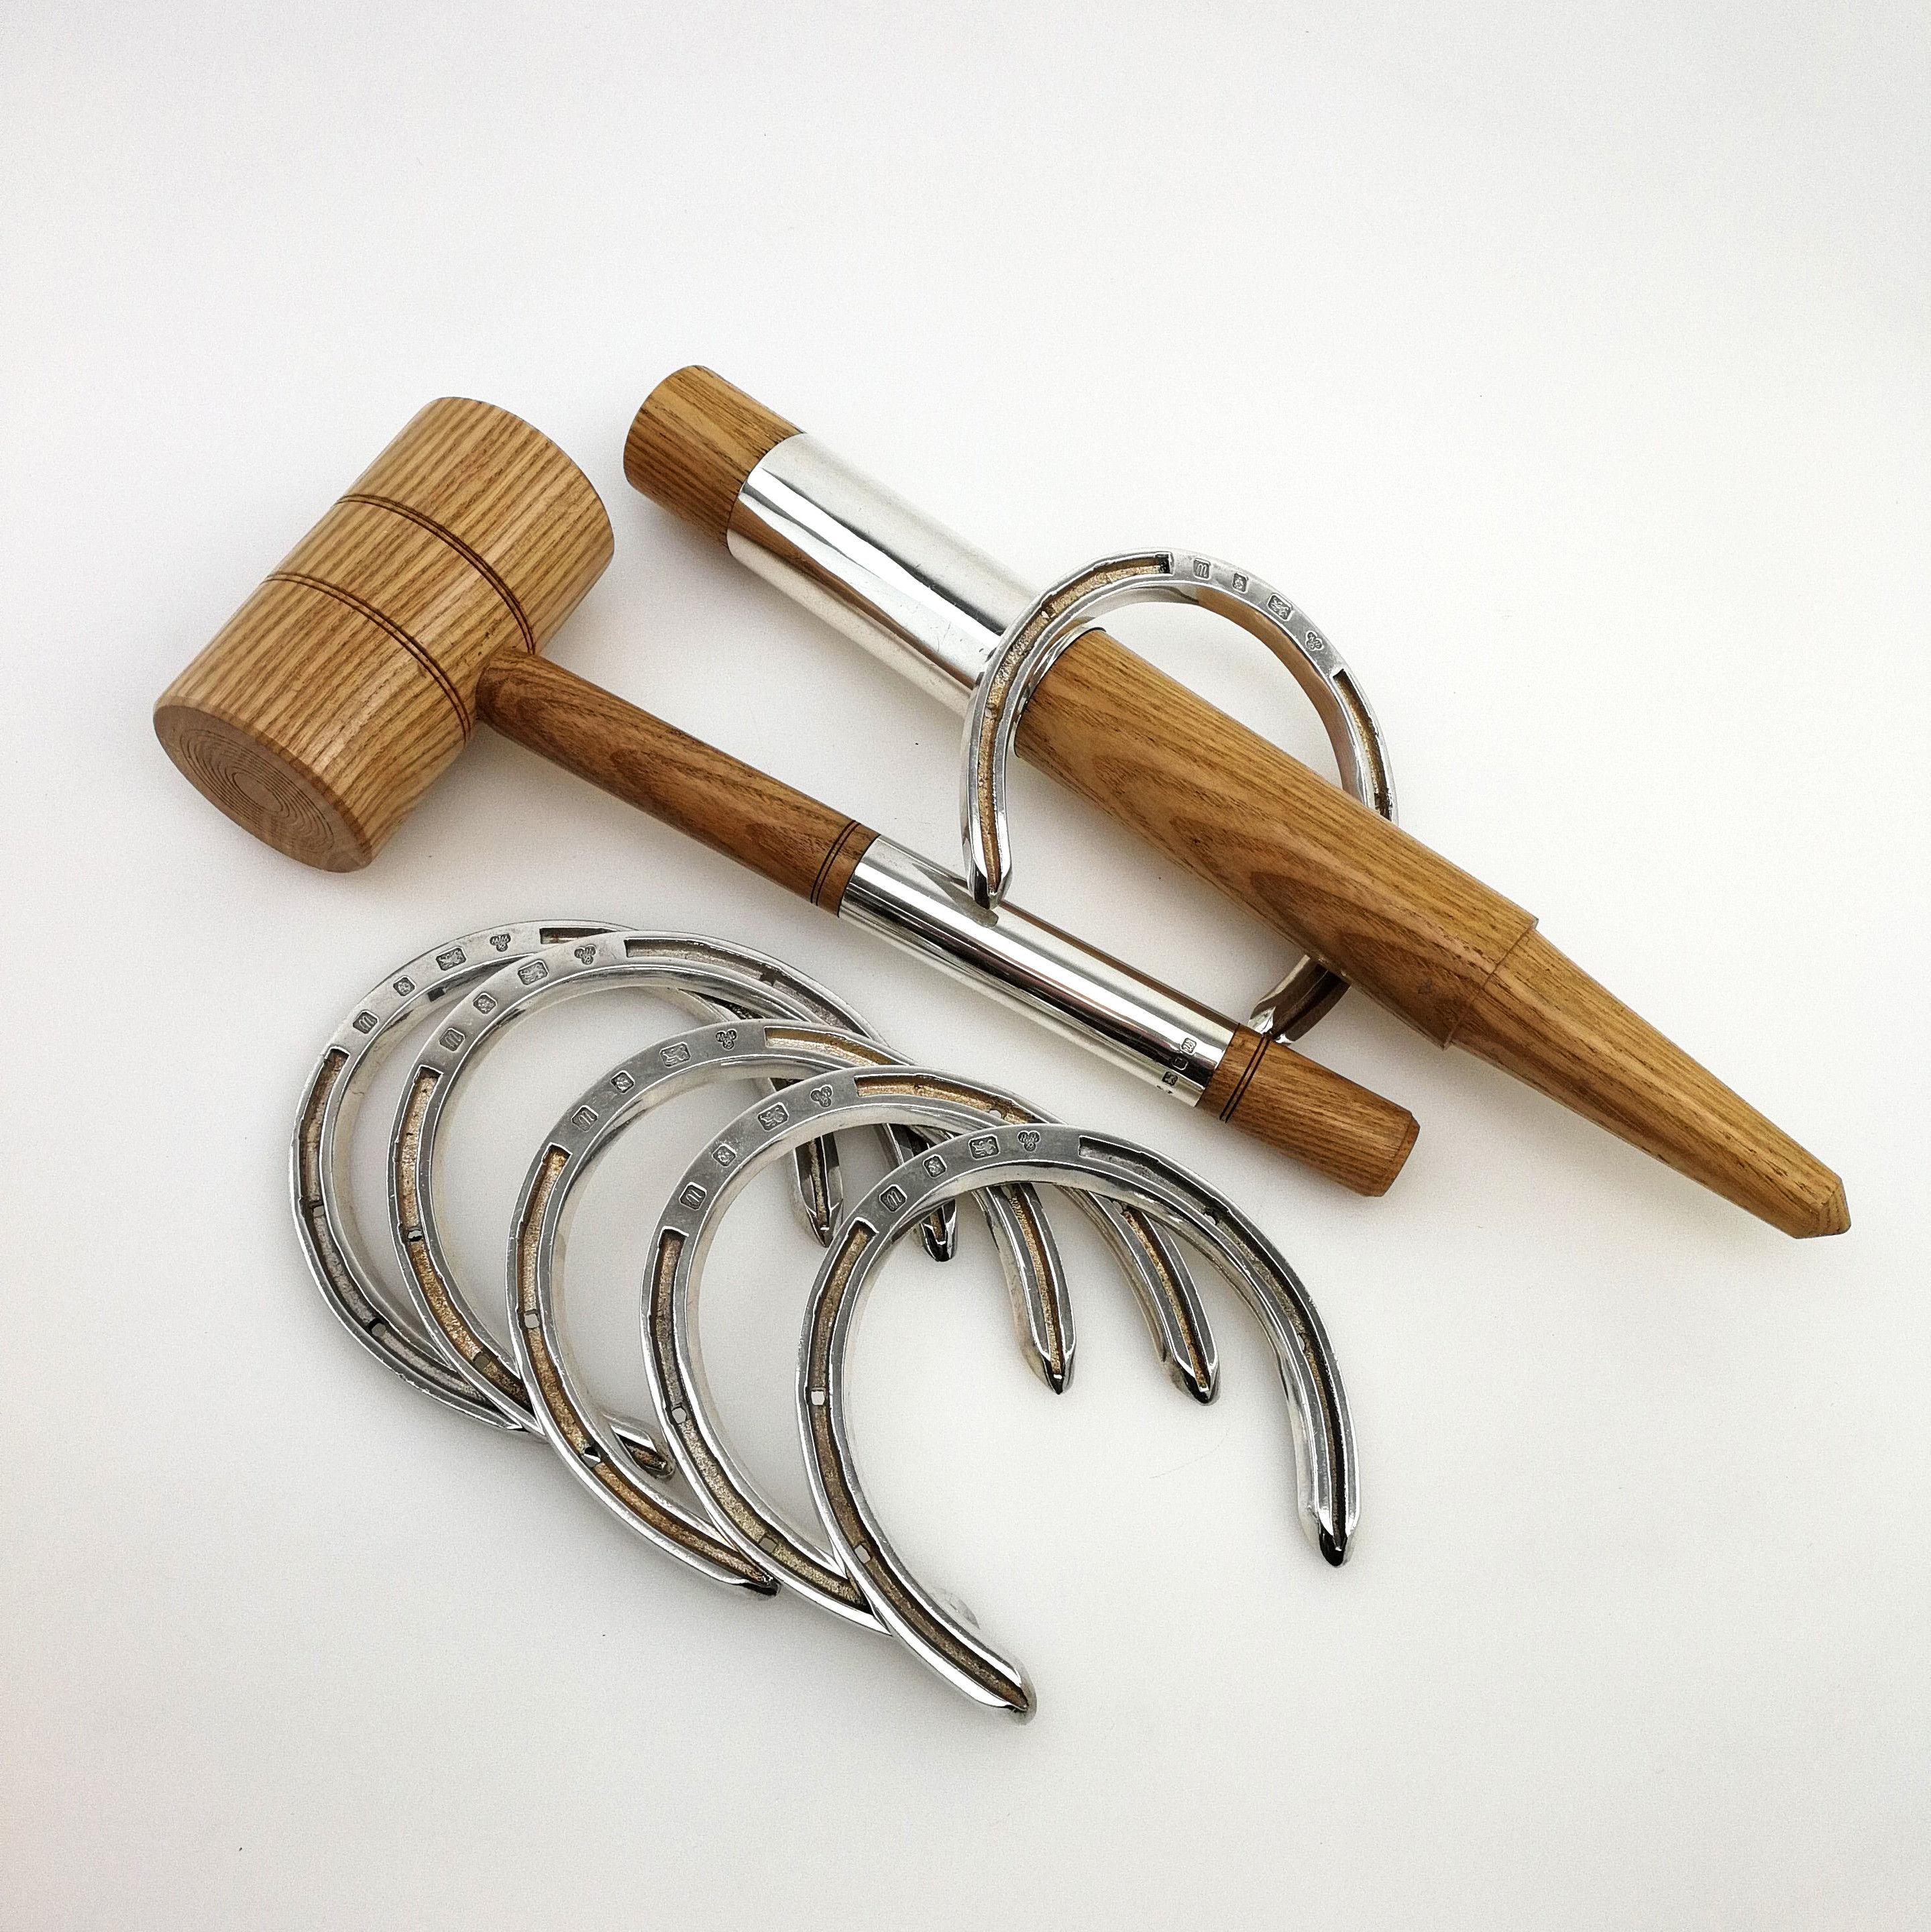 A rare and wonderful sterling Silver and Wood Horseshoes Set. This Traditional Game has been re-imagined in sterling Silver and Wood, with a set of 6 solid Silver Horse Shoes for Tossing, and a light wood Stake & Mallet each with a wide sterling